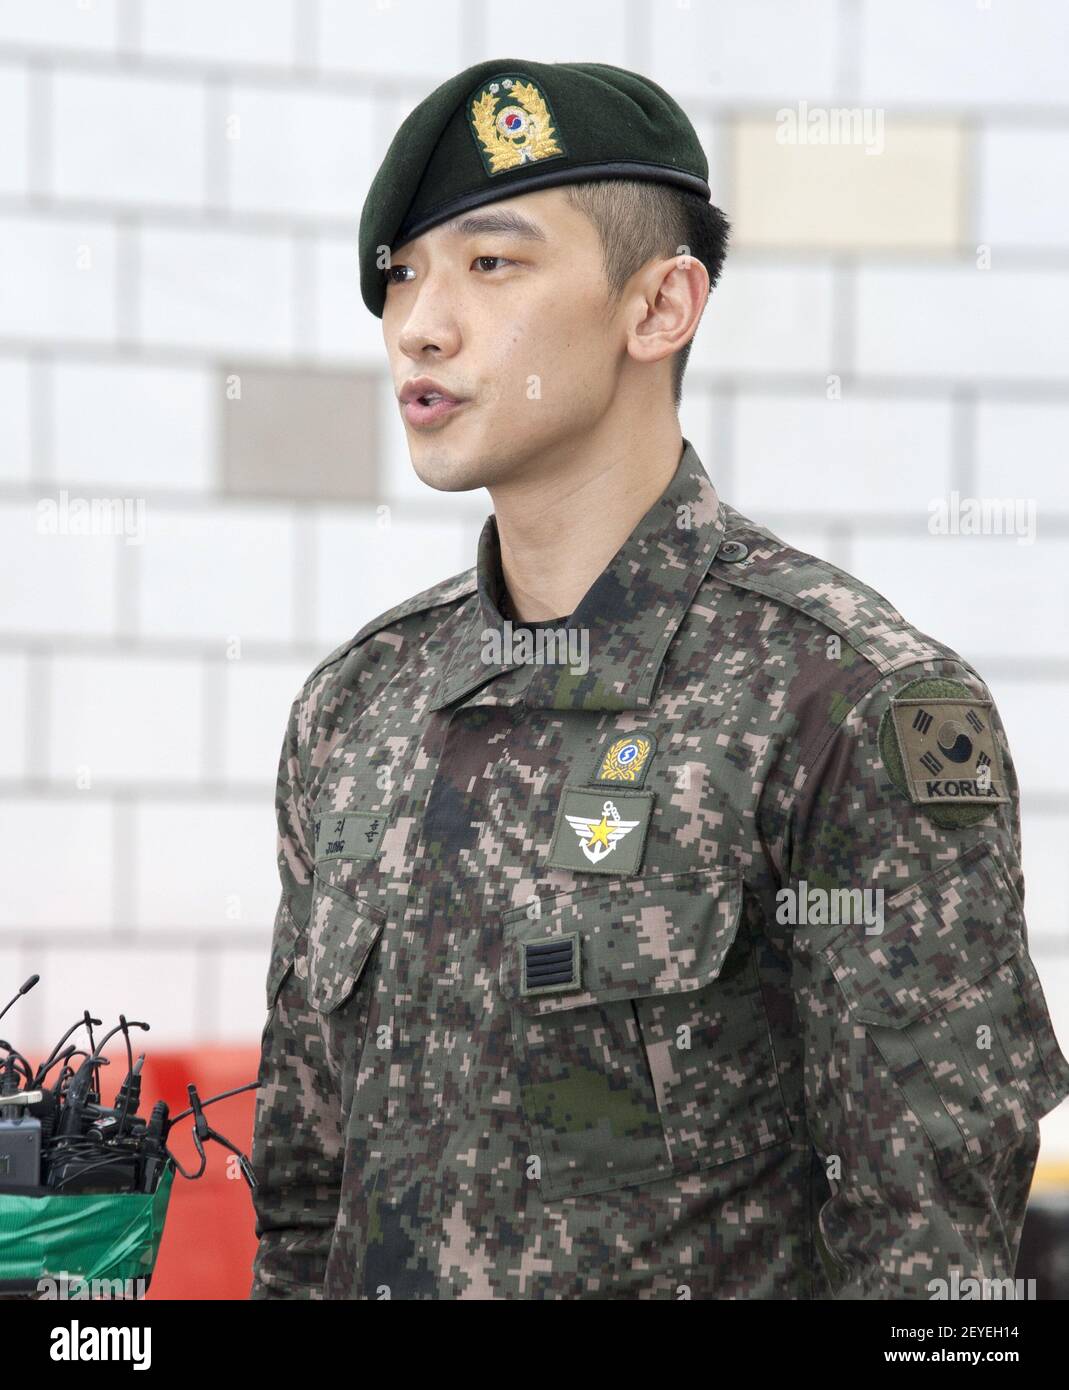 10 July 2013 - Seoul, South Korea : South Korean actor and singer Rain  (Korean name Jung Ji-Hoon), attends a discharge from military service  during a fan meet with media near the